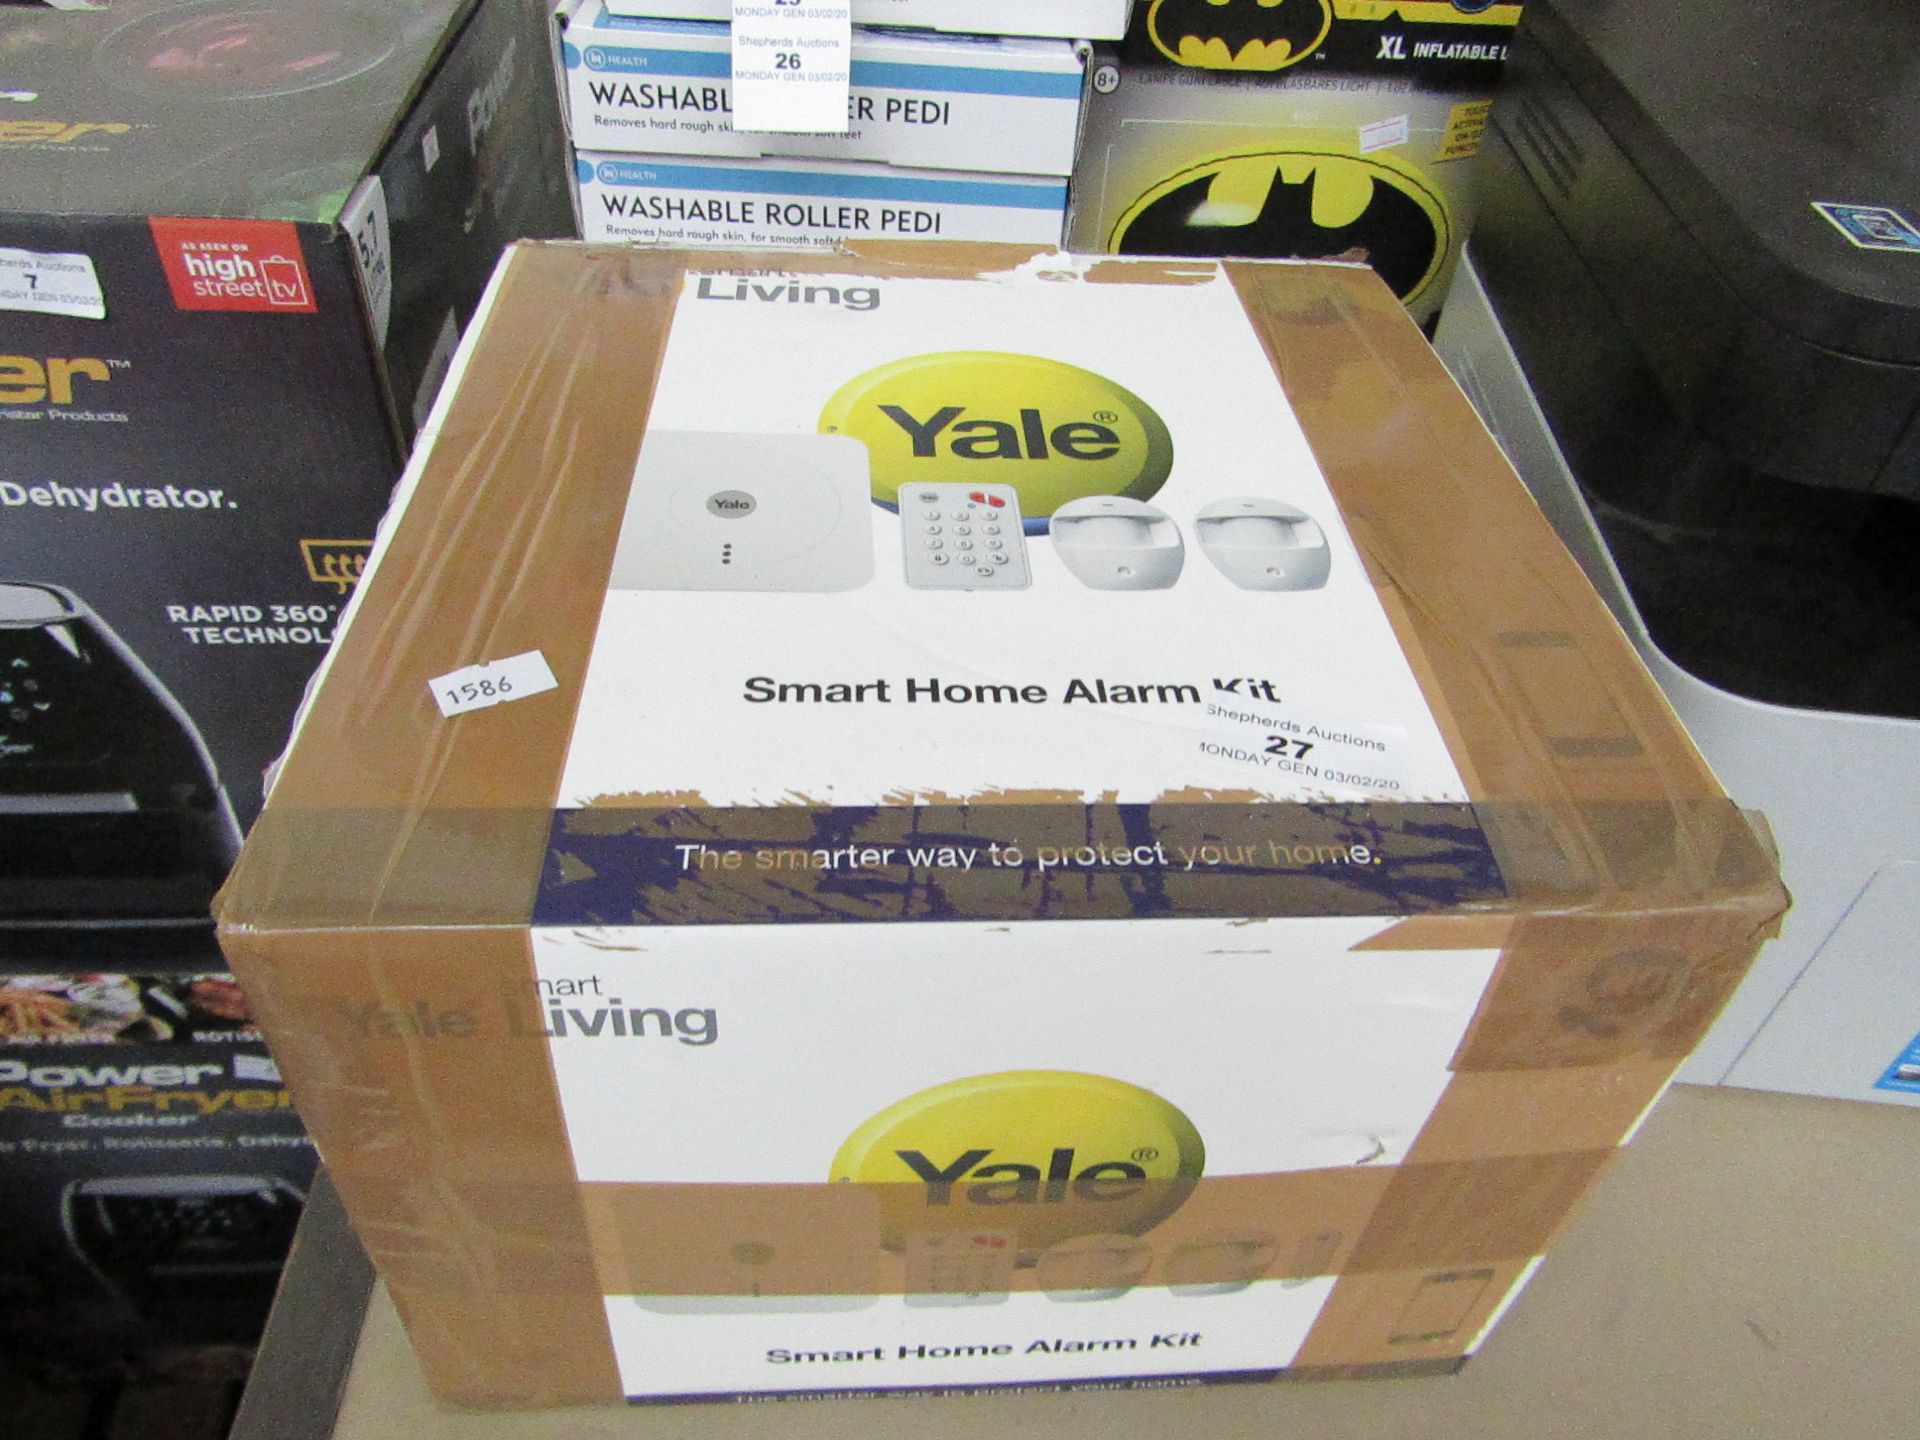 Yale Smart Home Alarm Kit. Boxed but unable to test